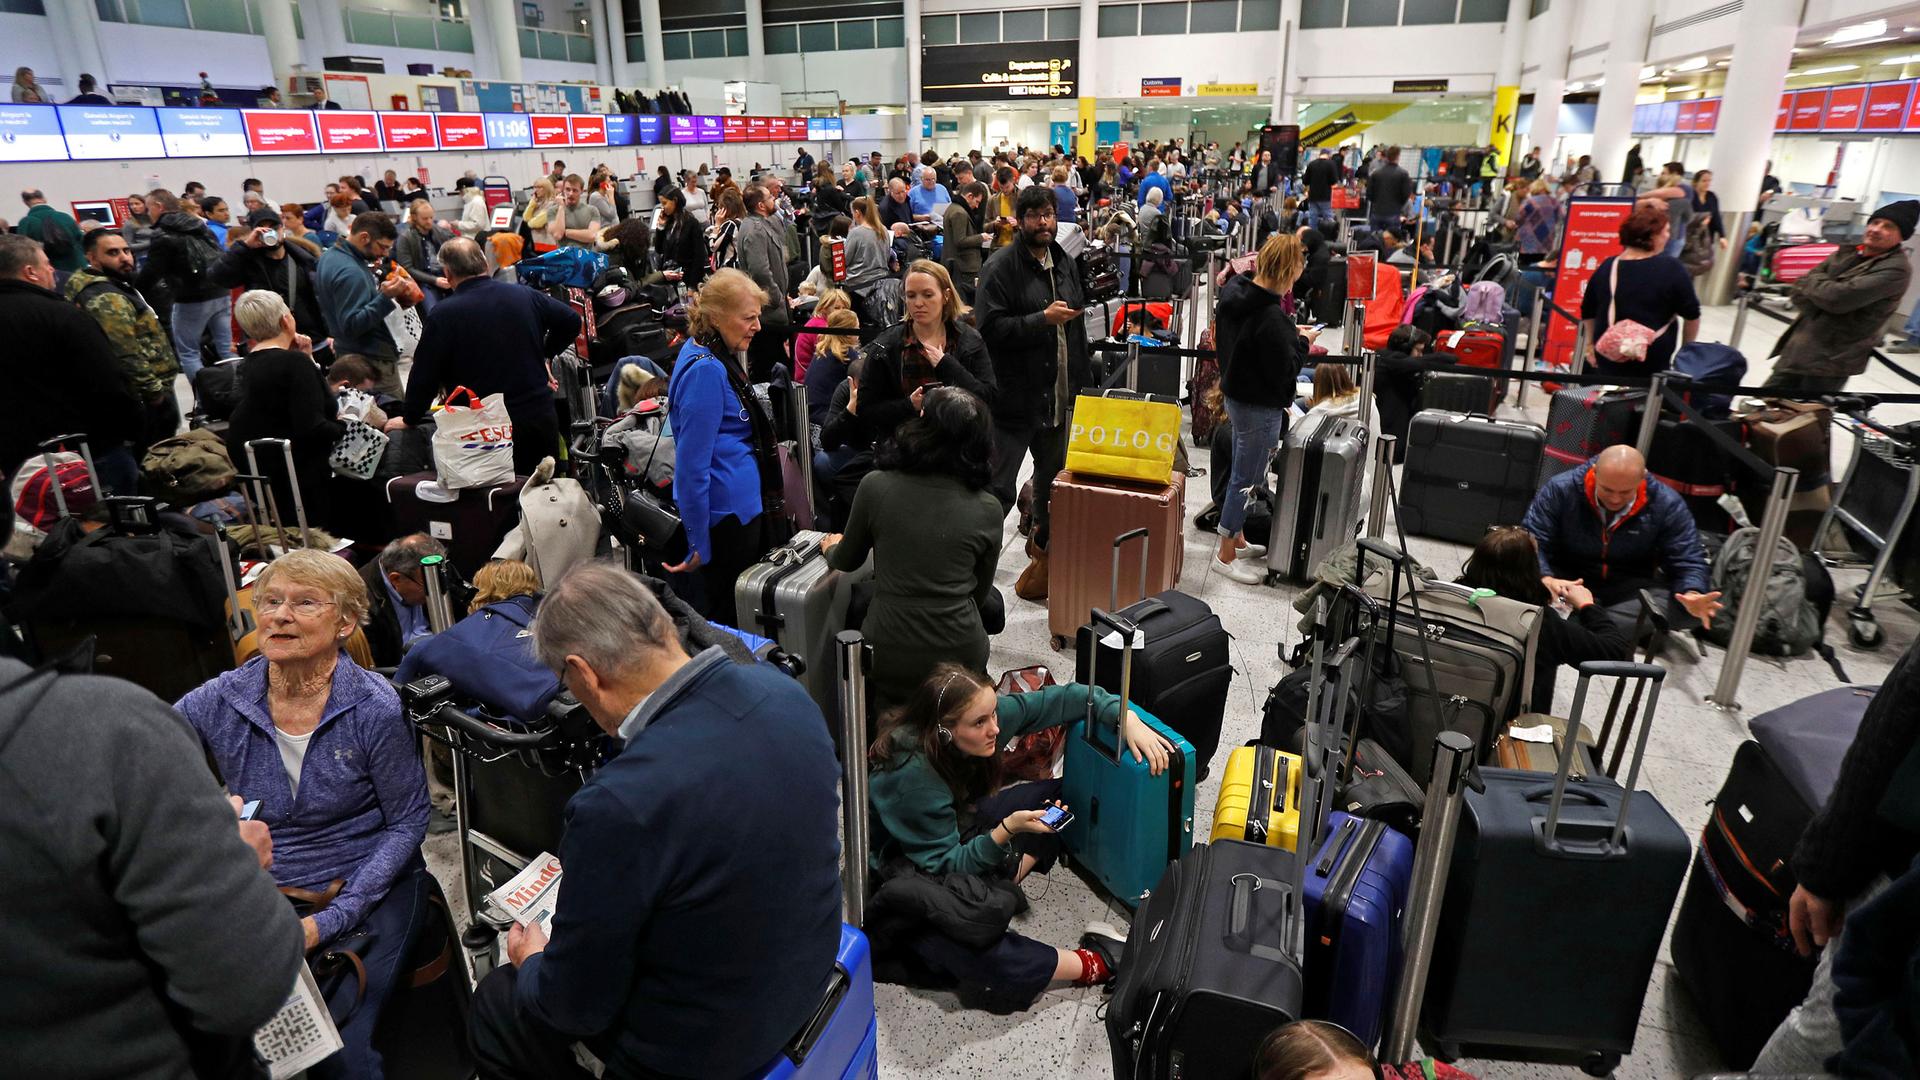 Crowds of people fill an airport terminal.